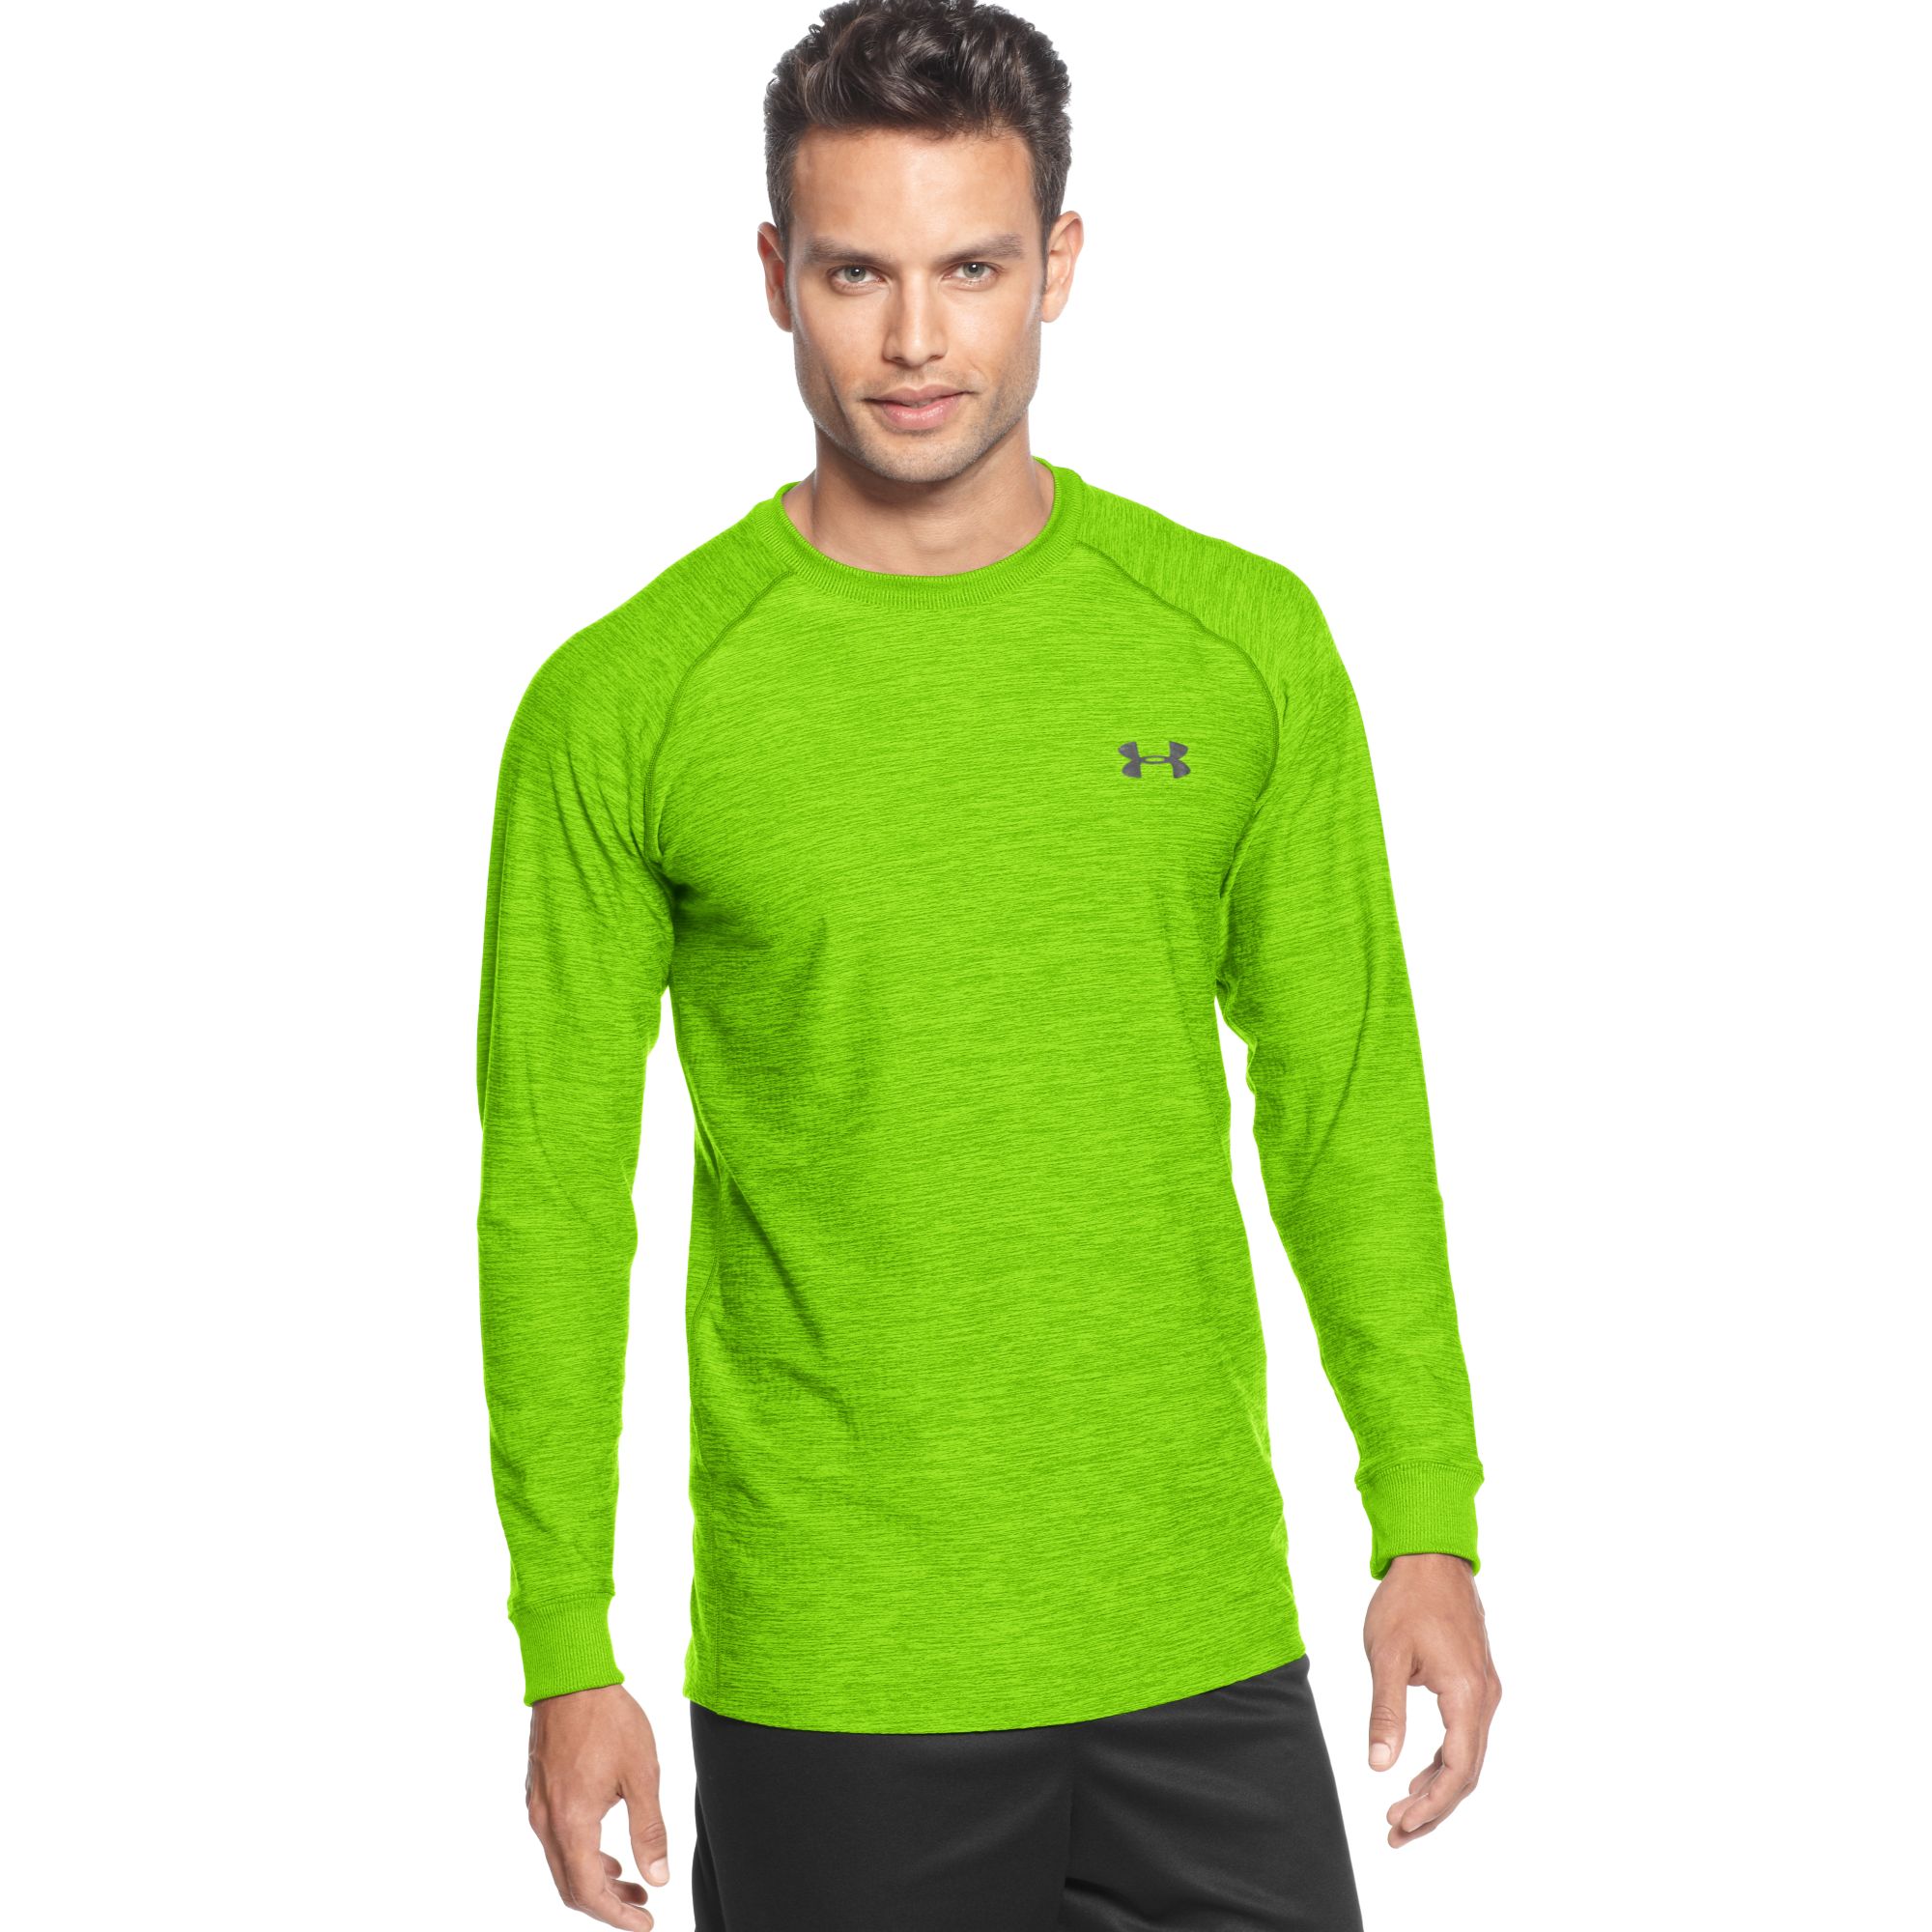 Lyst - Under Armour Cold Gear Infrared Longsleeve Tshirt in Green for Men